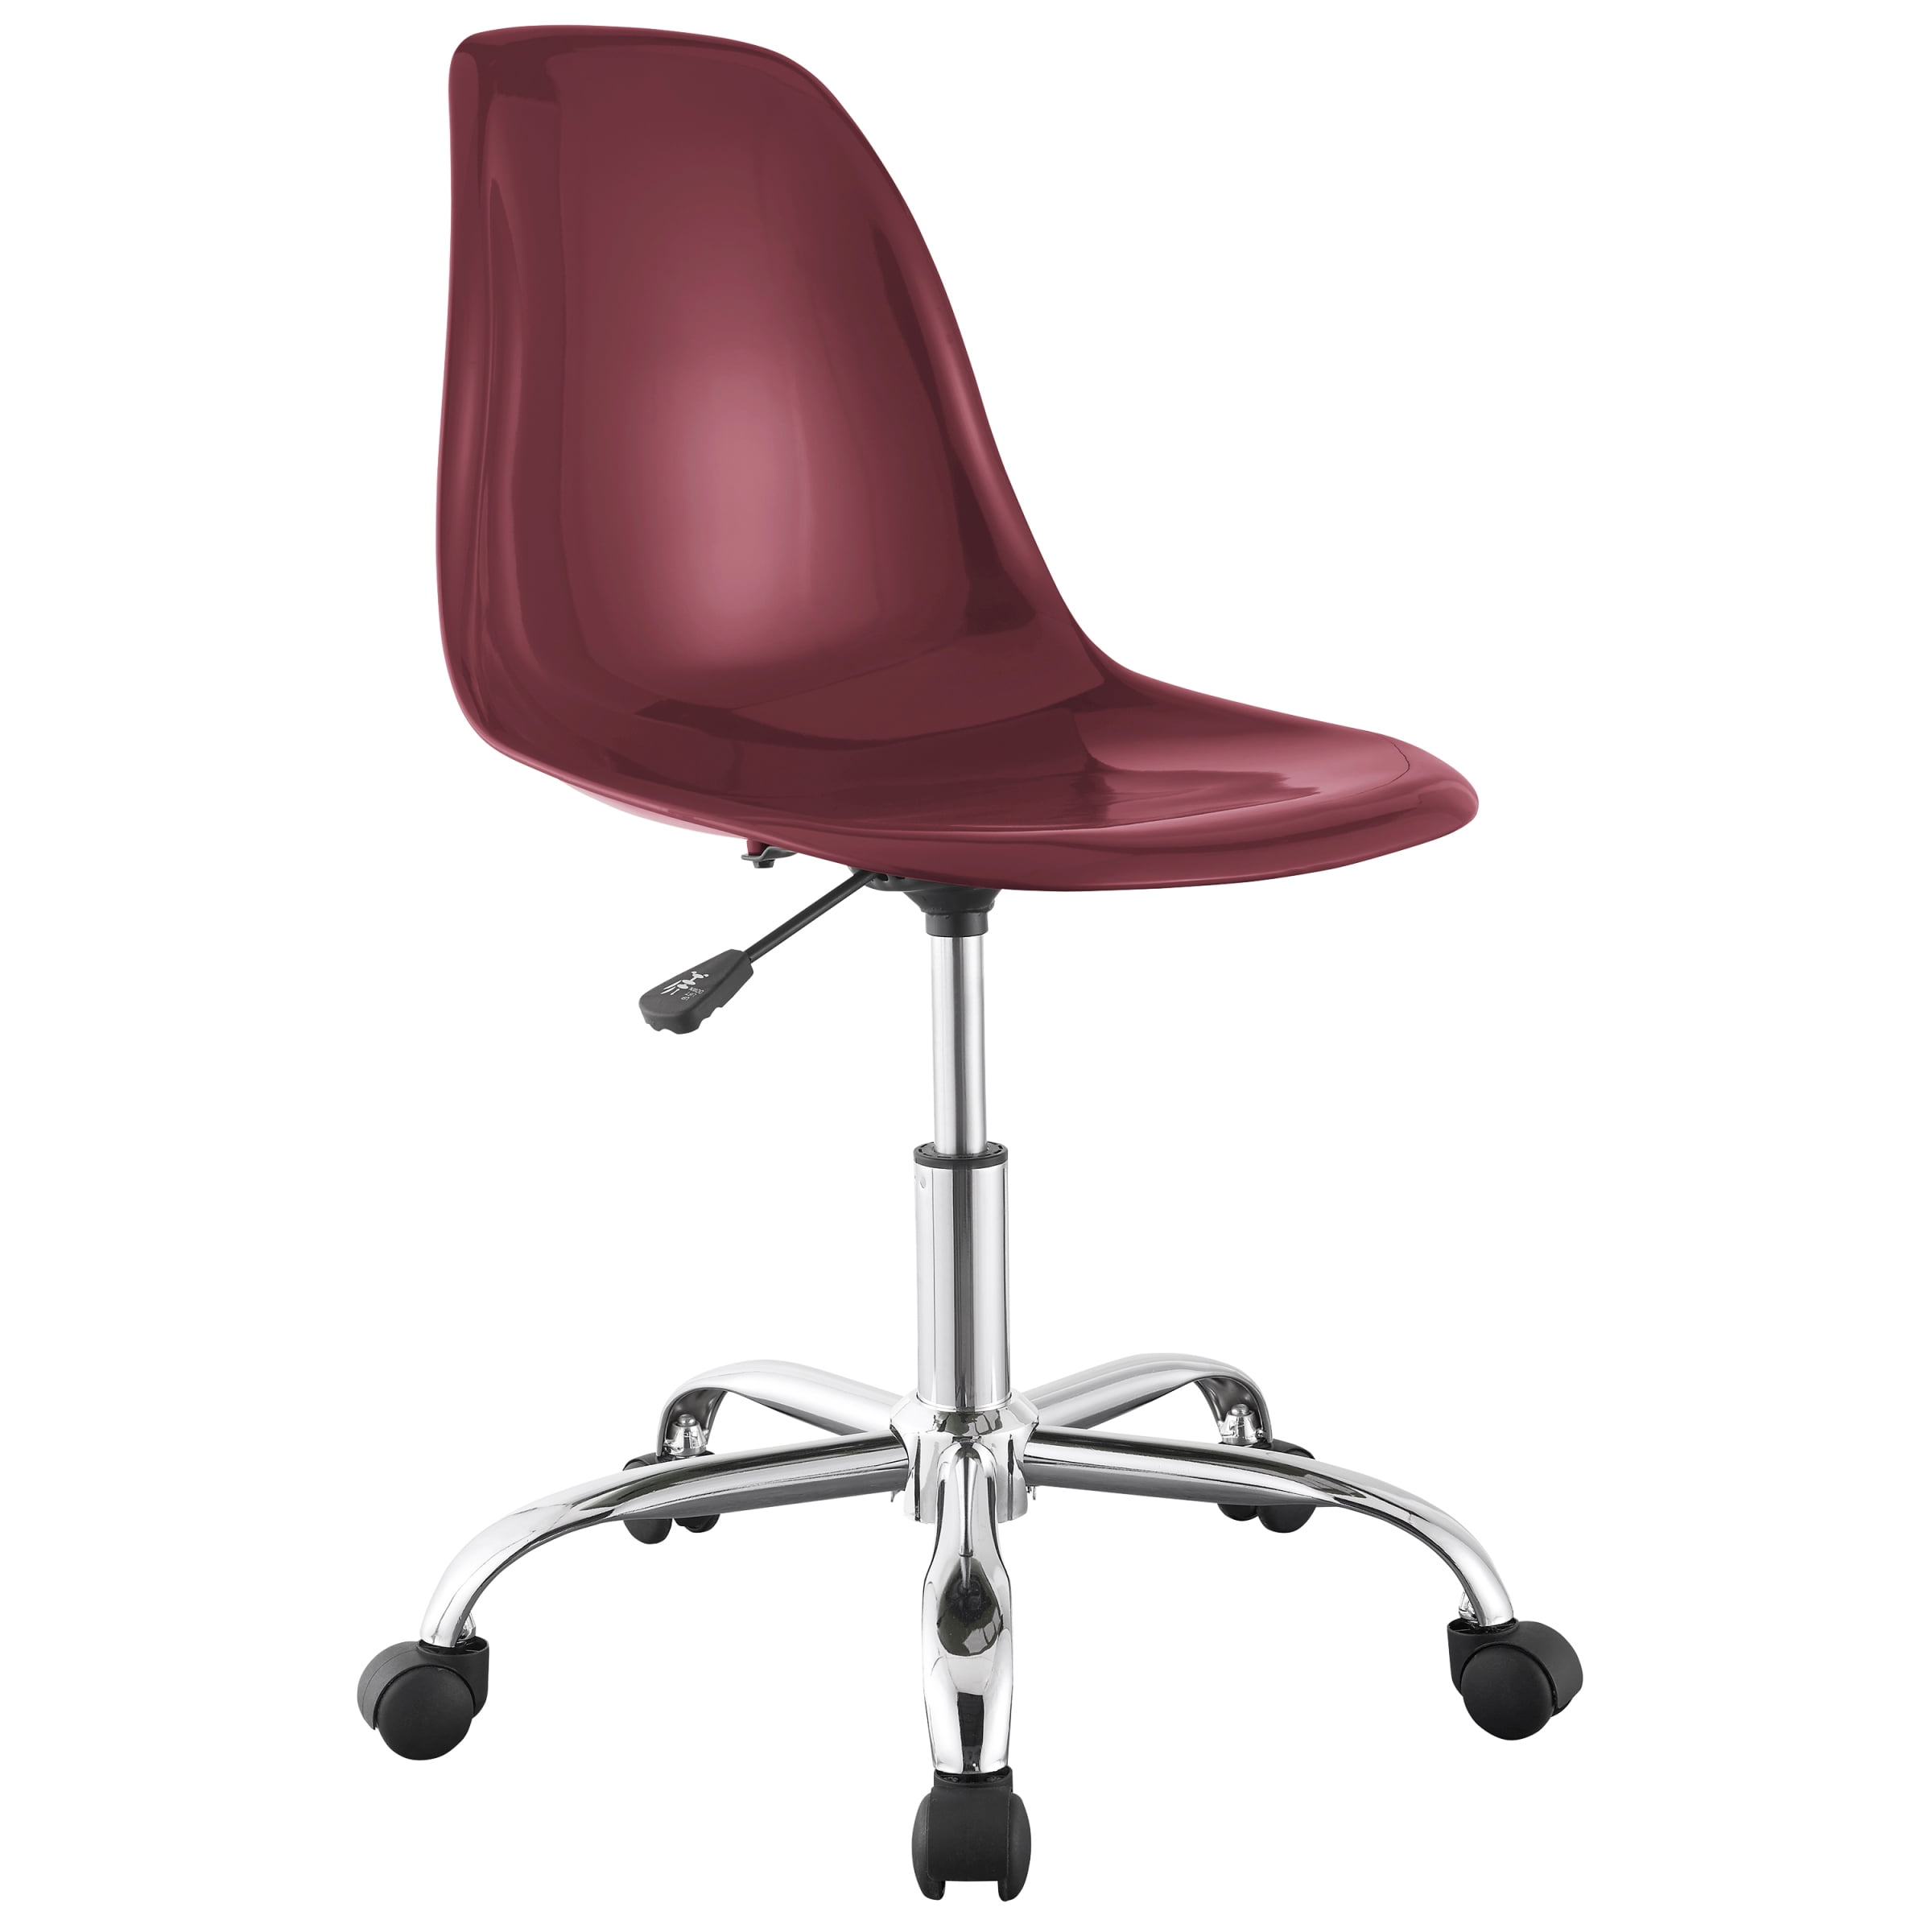 Mainstays Contemporary Office Chair, Multiple Colors - Walmart.com